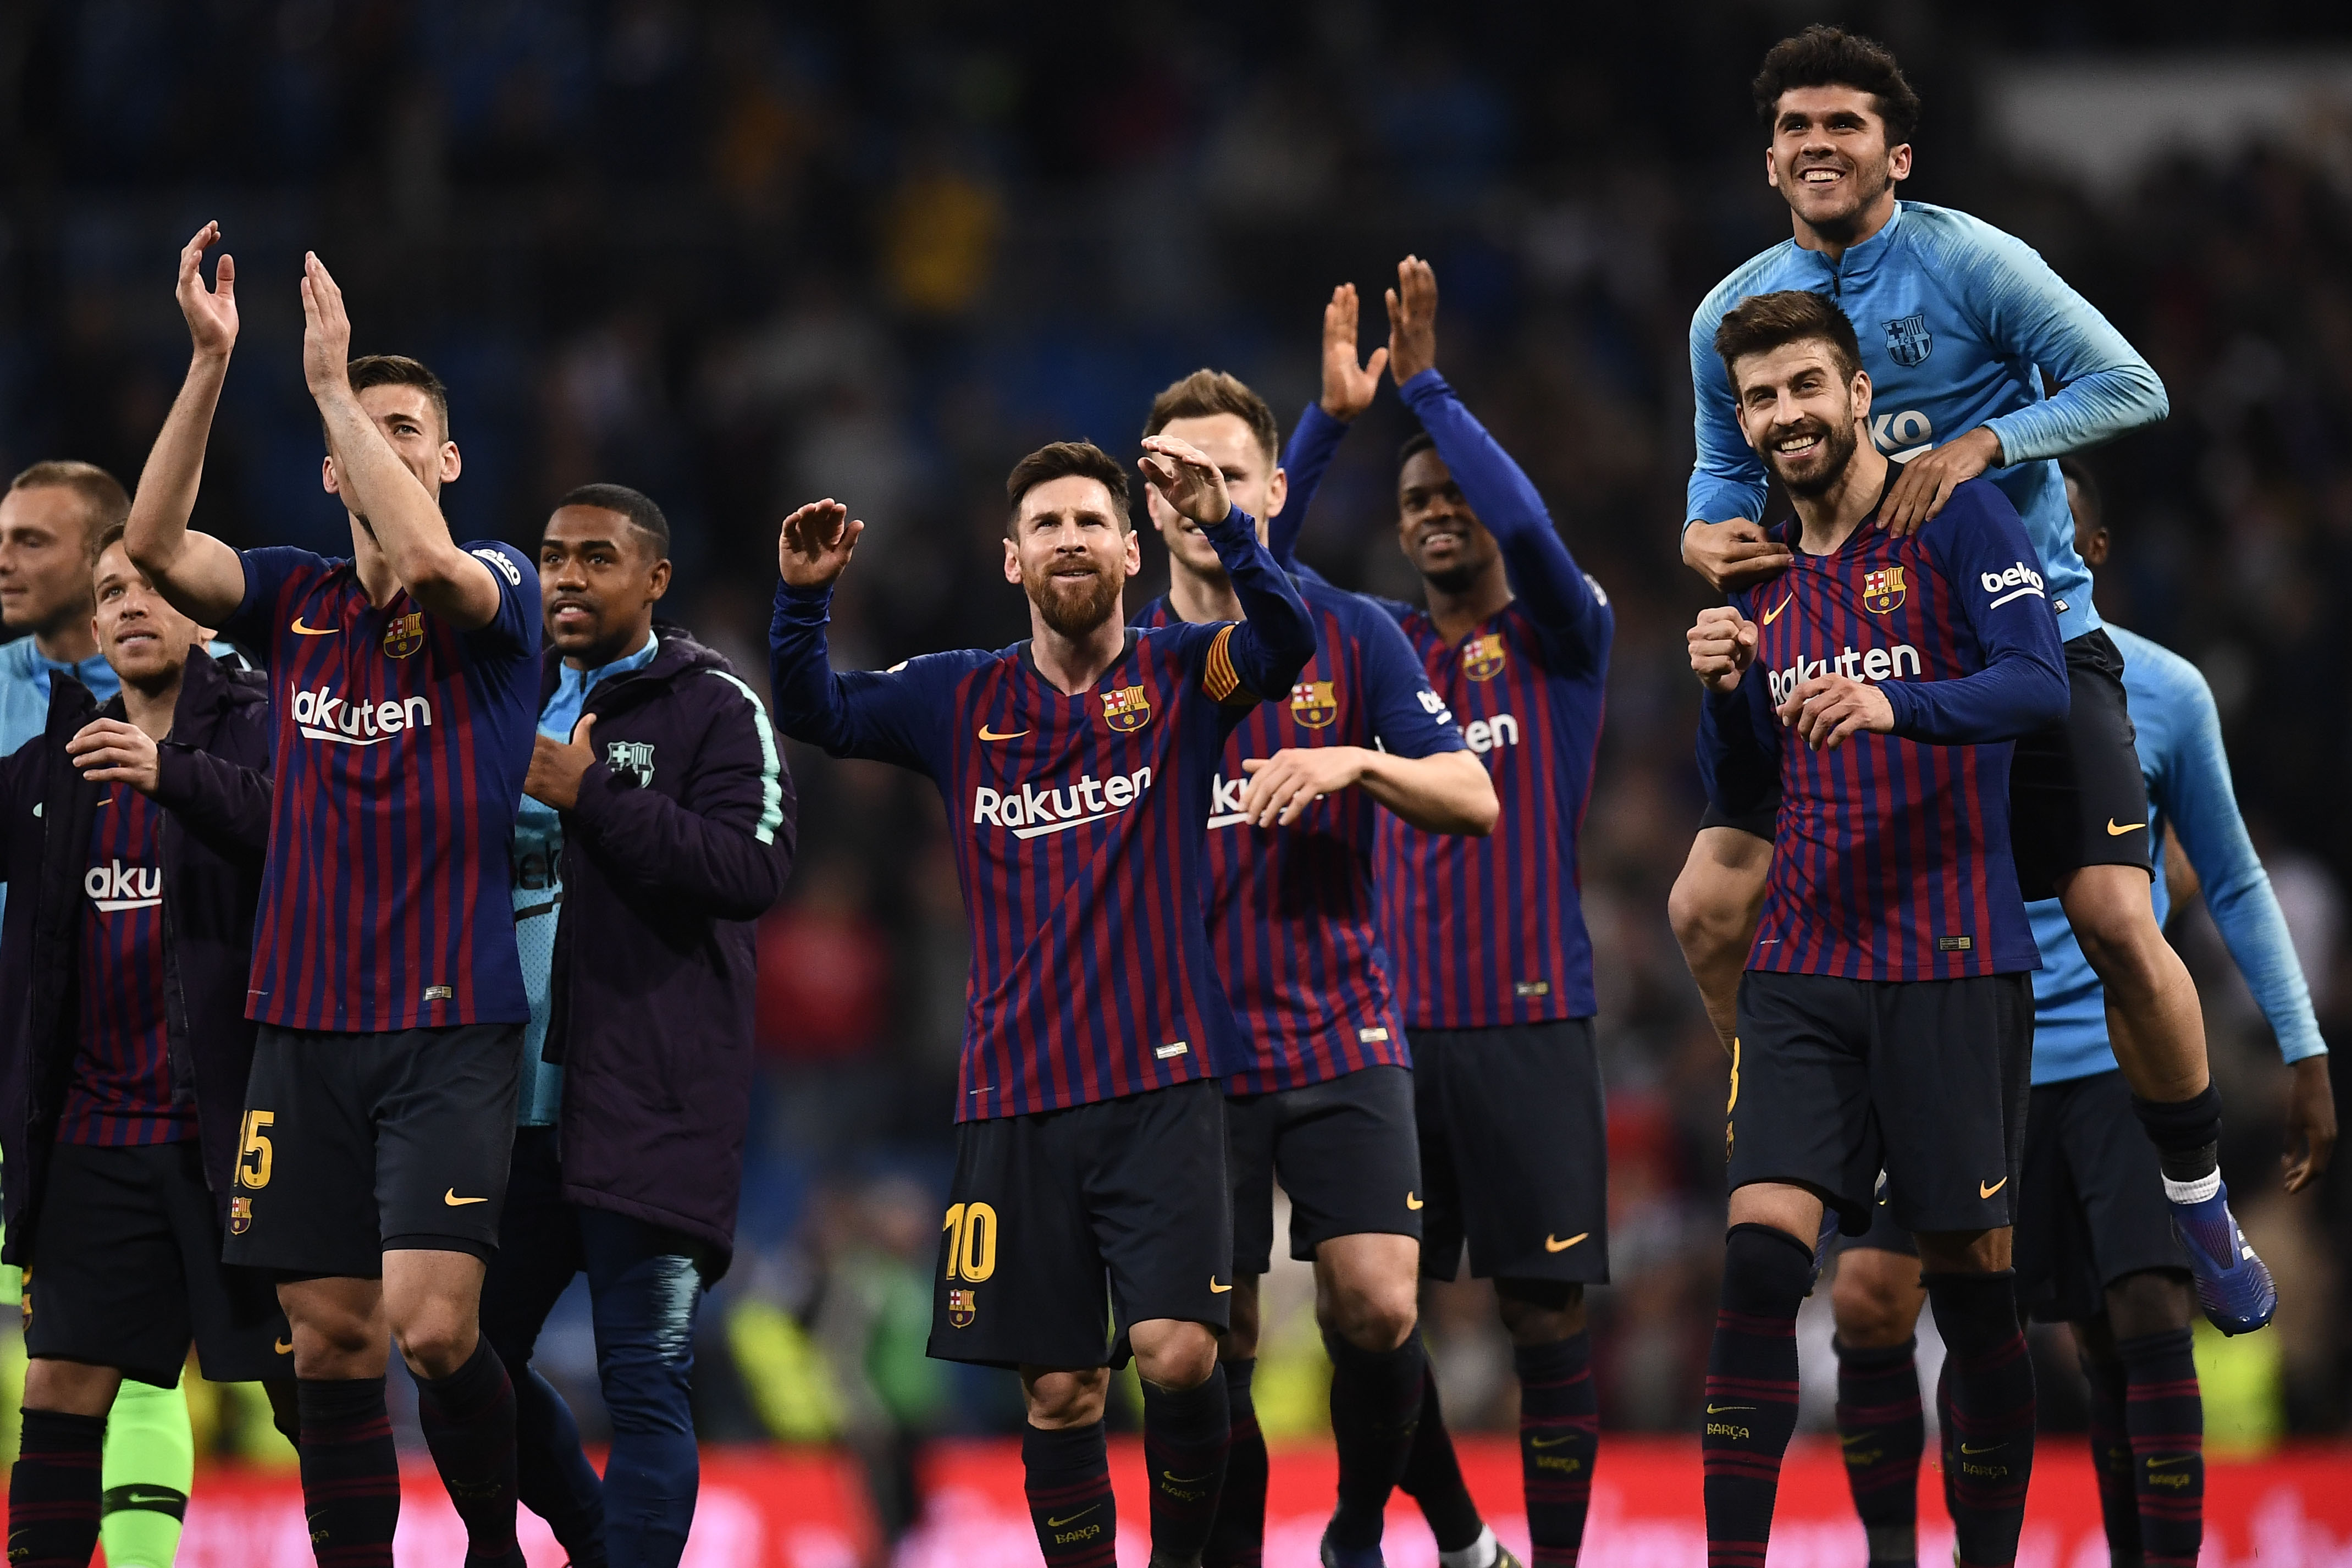 Barcelona players celebrate their win at the end of the Spanish league football match between Real Madrid CF and FC Barcelona at the Santiago Bernabeu stadium in Madrid on March 2, 2019. (Photo by OSCAR DEL POZO / AFP)        (Photo credit should read OSCAR DEL POZO/AFP/Getty Images)